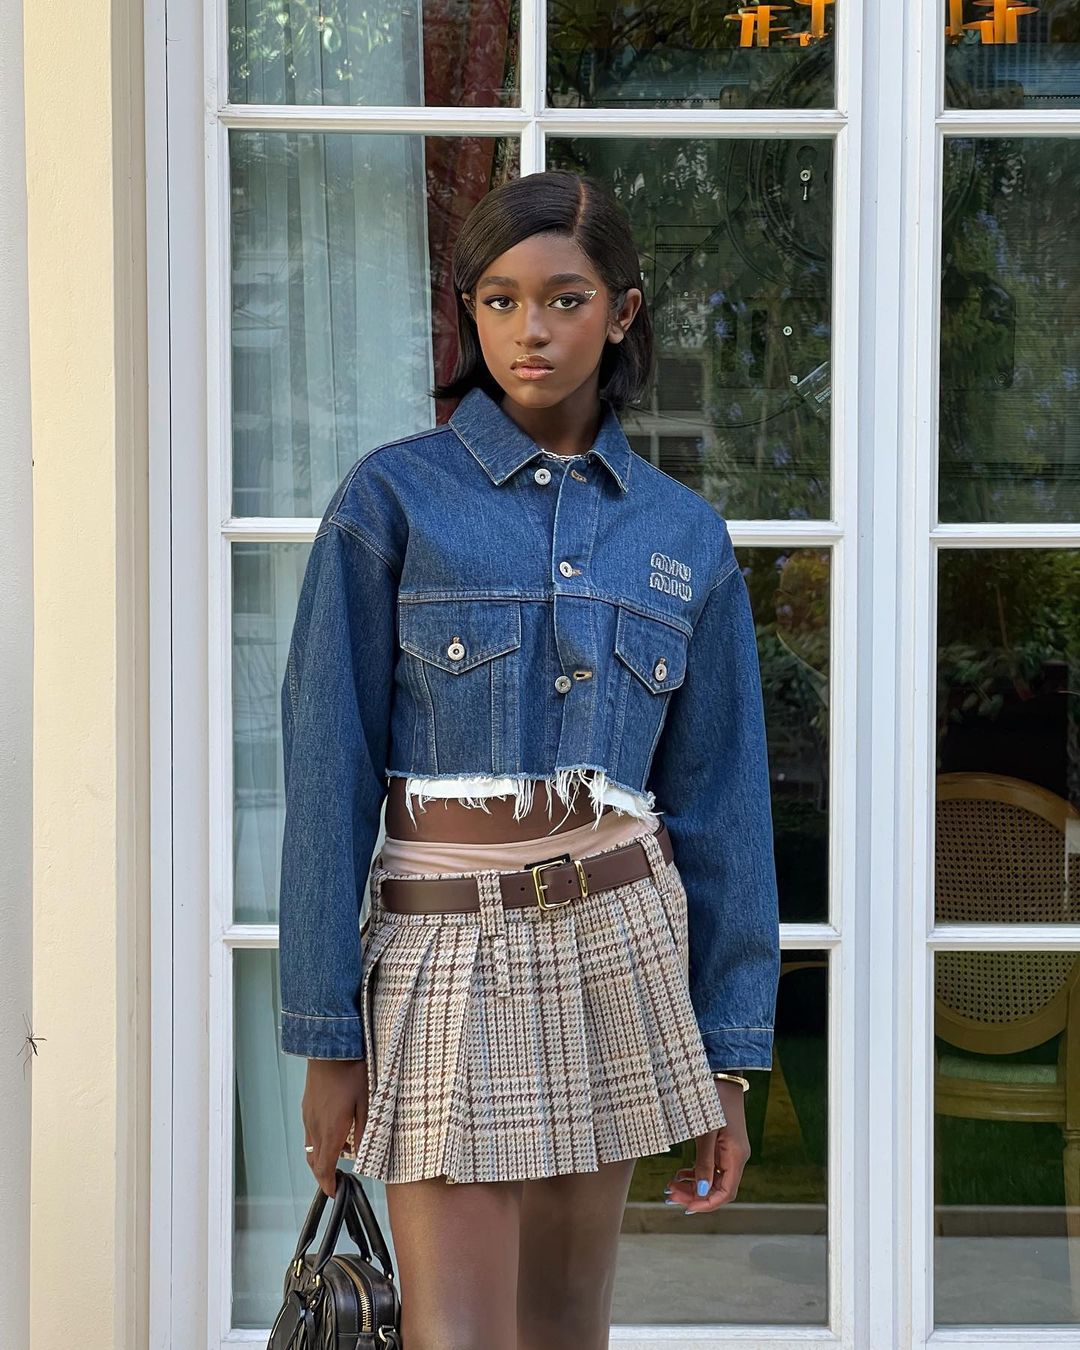 How To Score Miu Miu's Iconic School Girl Look For Less